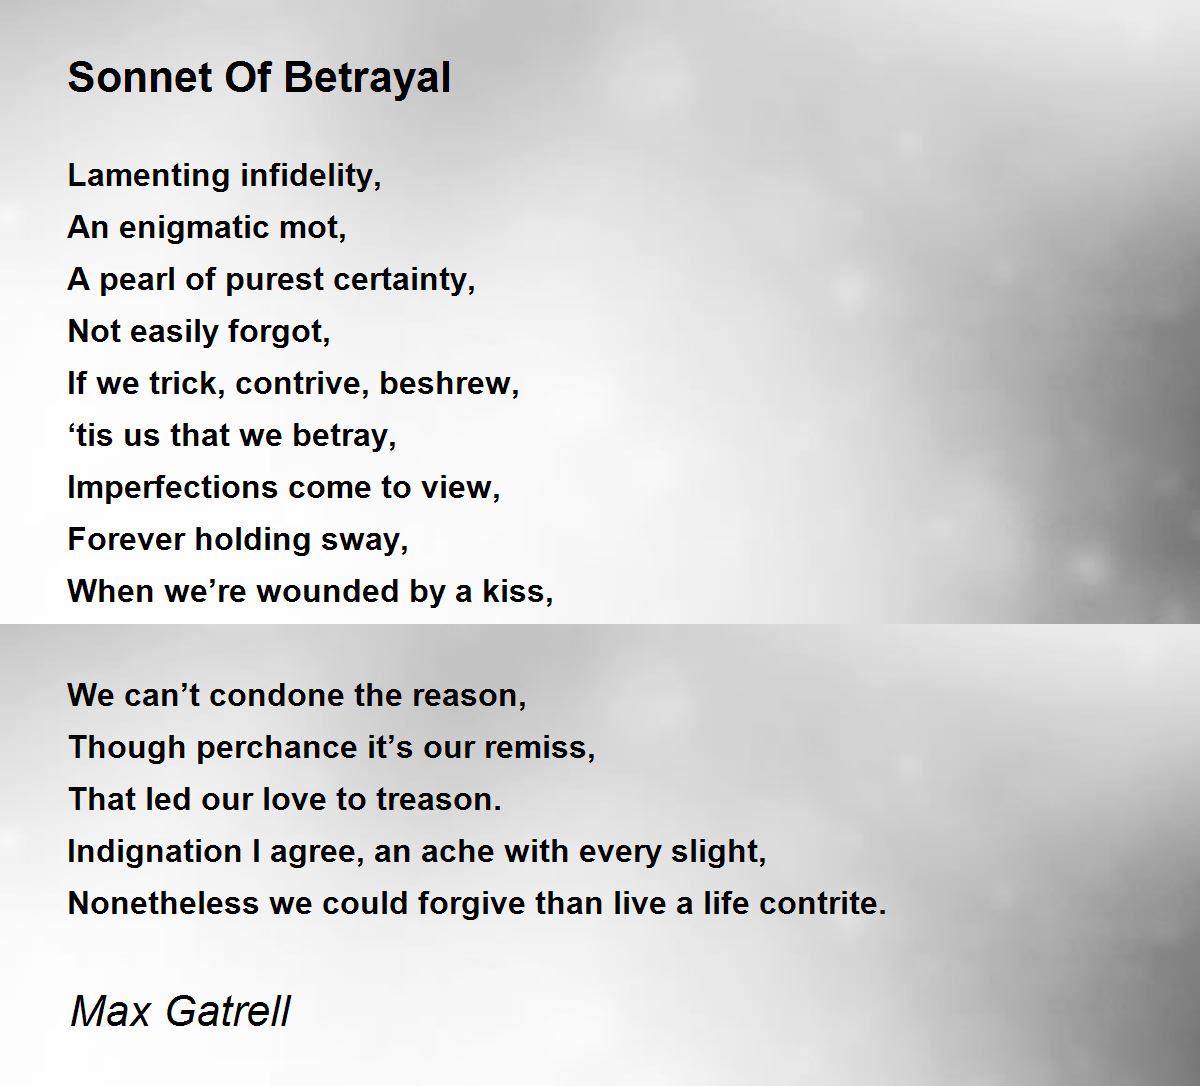 Sonnet Of Betrayal - Sonnet Of Betrayal Poem by Max Gatrell